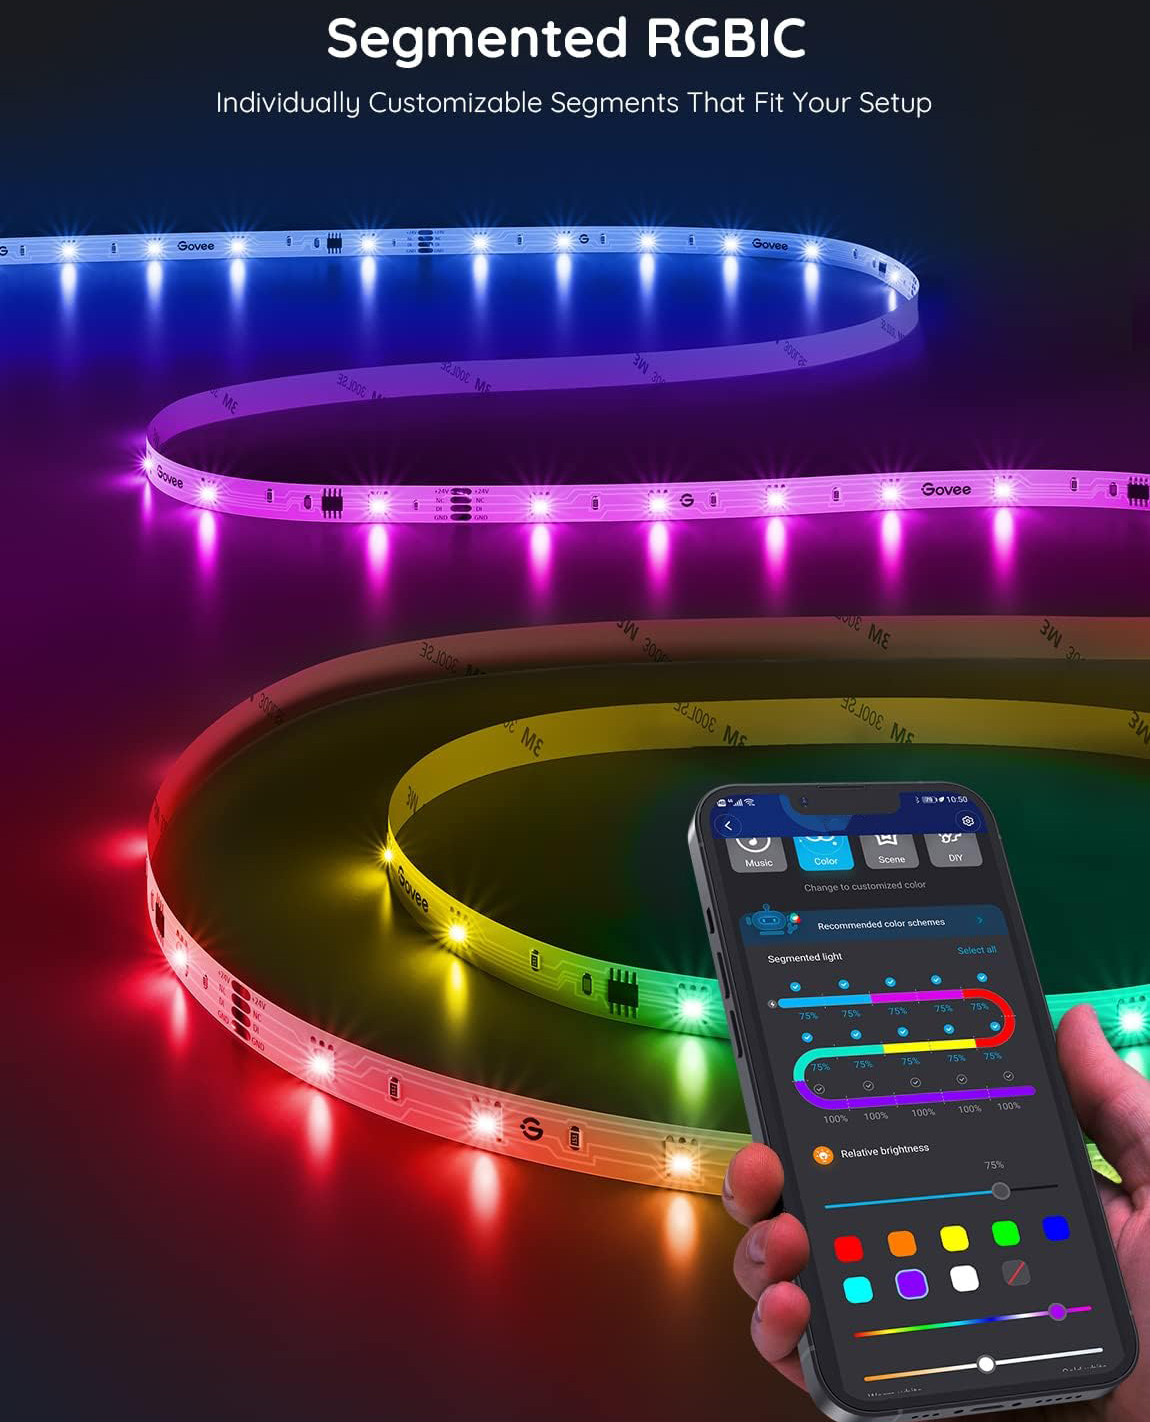 LED-Light-Strip-Led-Strip-Lights-5M-Smart-Light-Strips-with-Alexa-and-Google-Home-App-Control-Remote-16-Million-Colors-RGB-Led-Lights-for-Bedroom-Home-Kitchen-Party-41